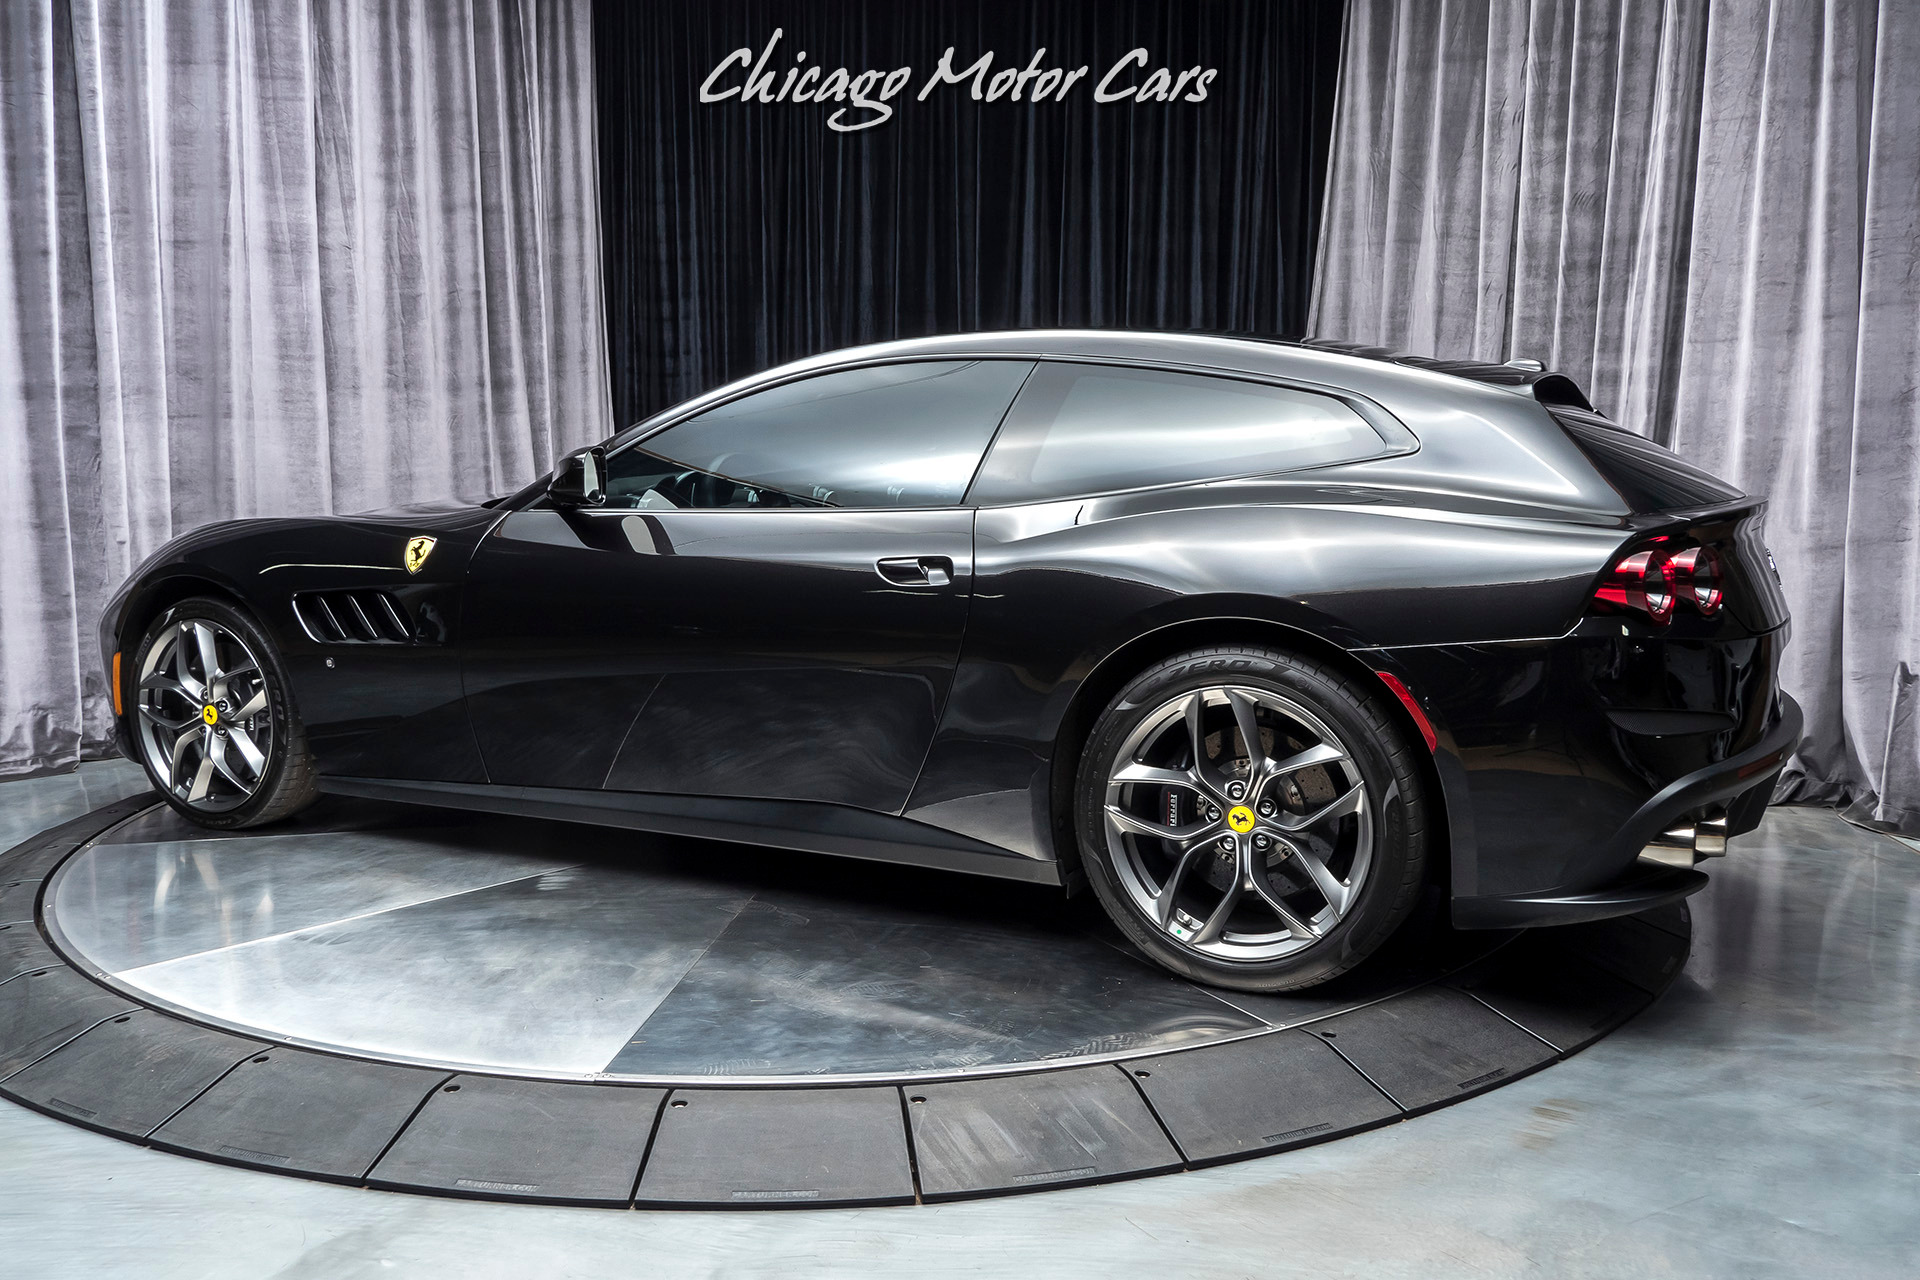 Used 2018 Ferrari GTC4Lusso T Hatchback MSRP 302K+ Panoramic Roof